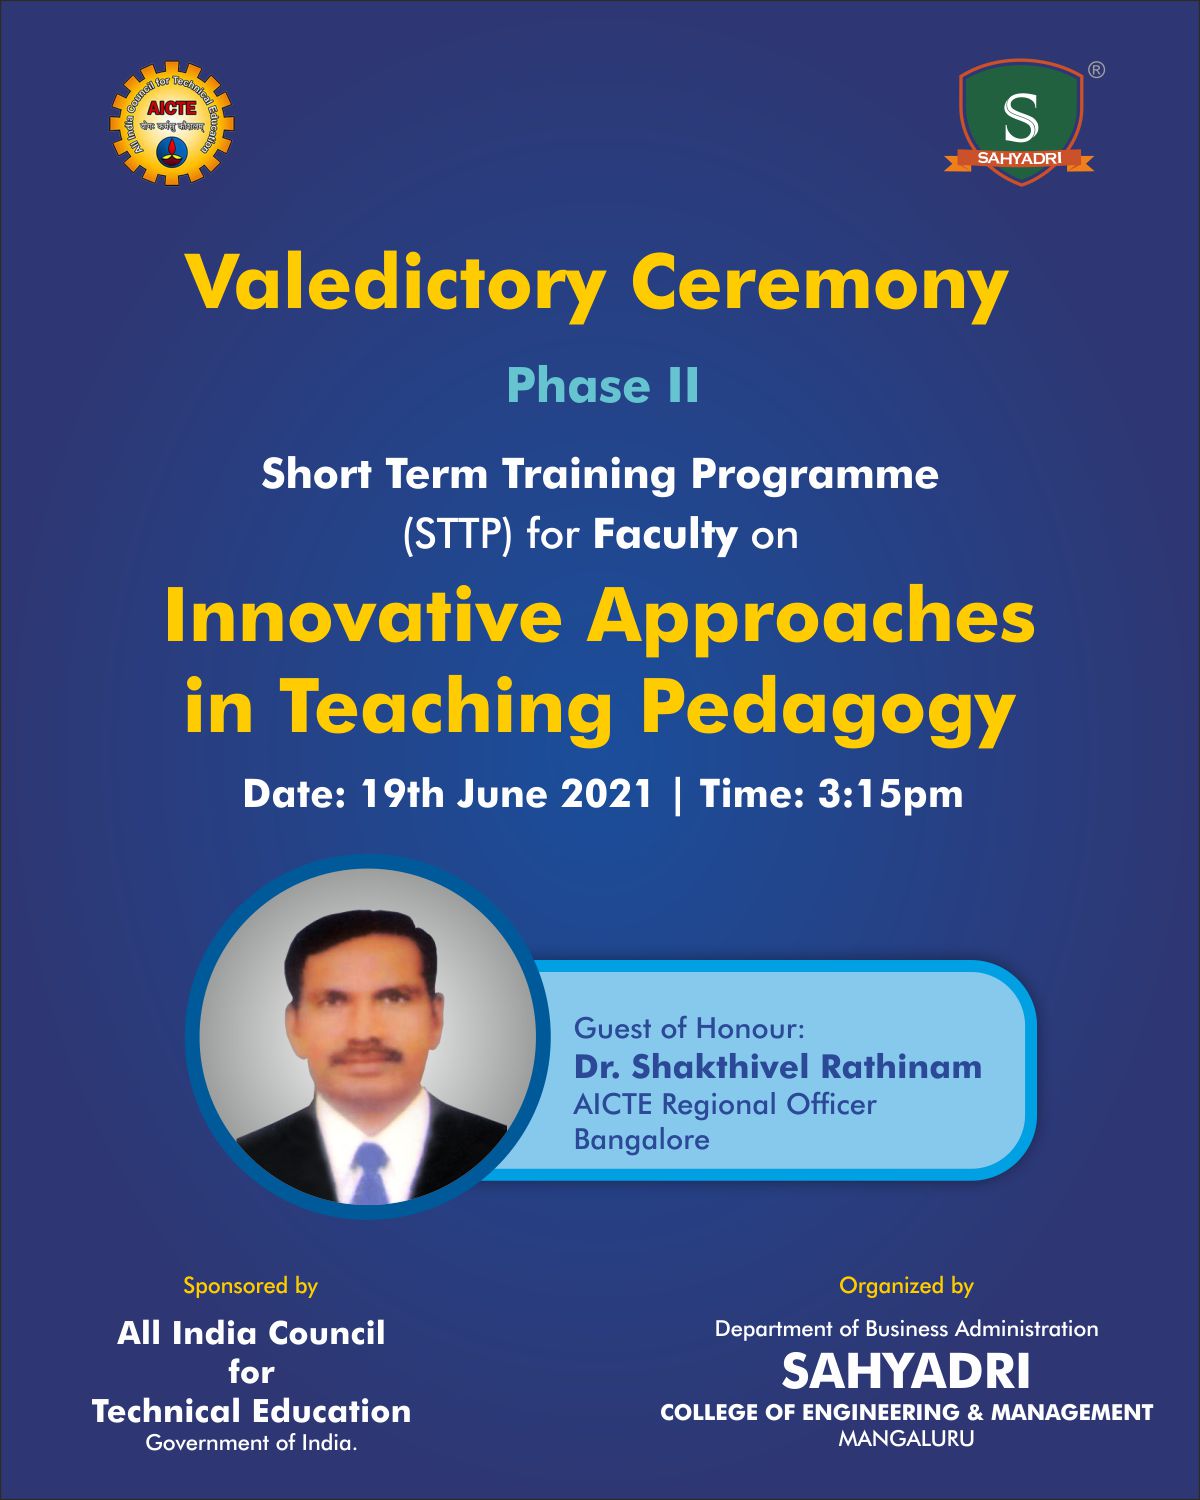 Valedictory Ceremony: Phase II of AICTE One-Week Sponsored Short Term Training Programme (STTP) on “Innovative Approaches in Teaching Pedagogy”